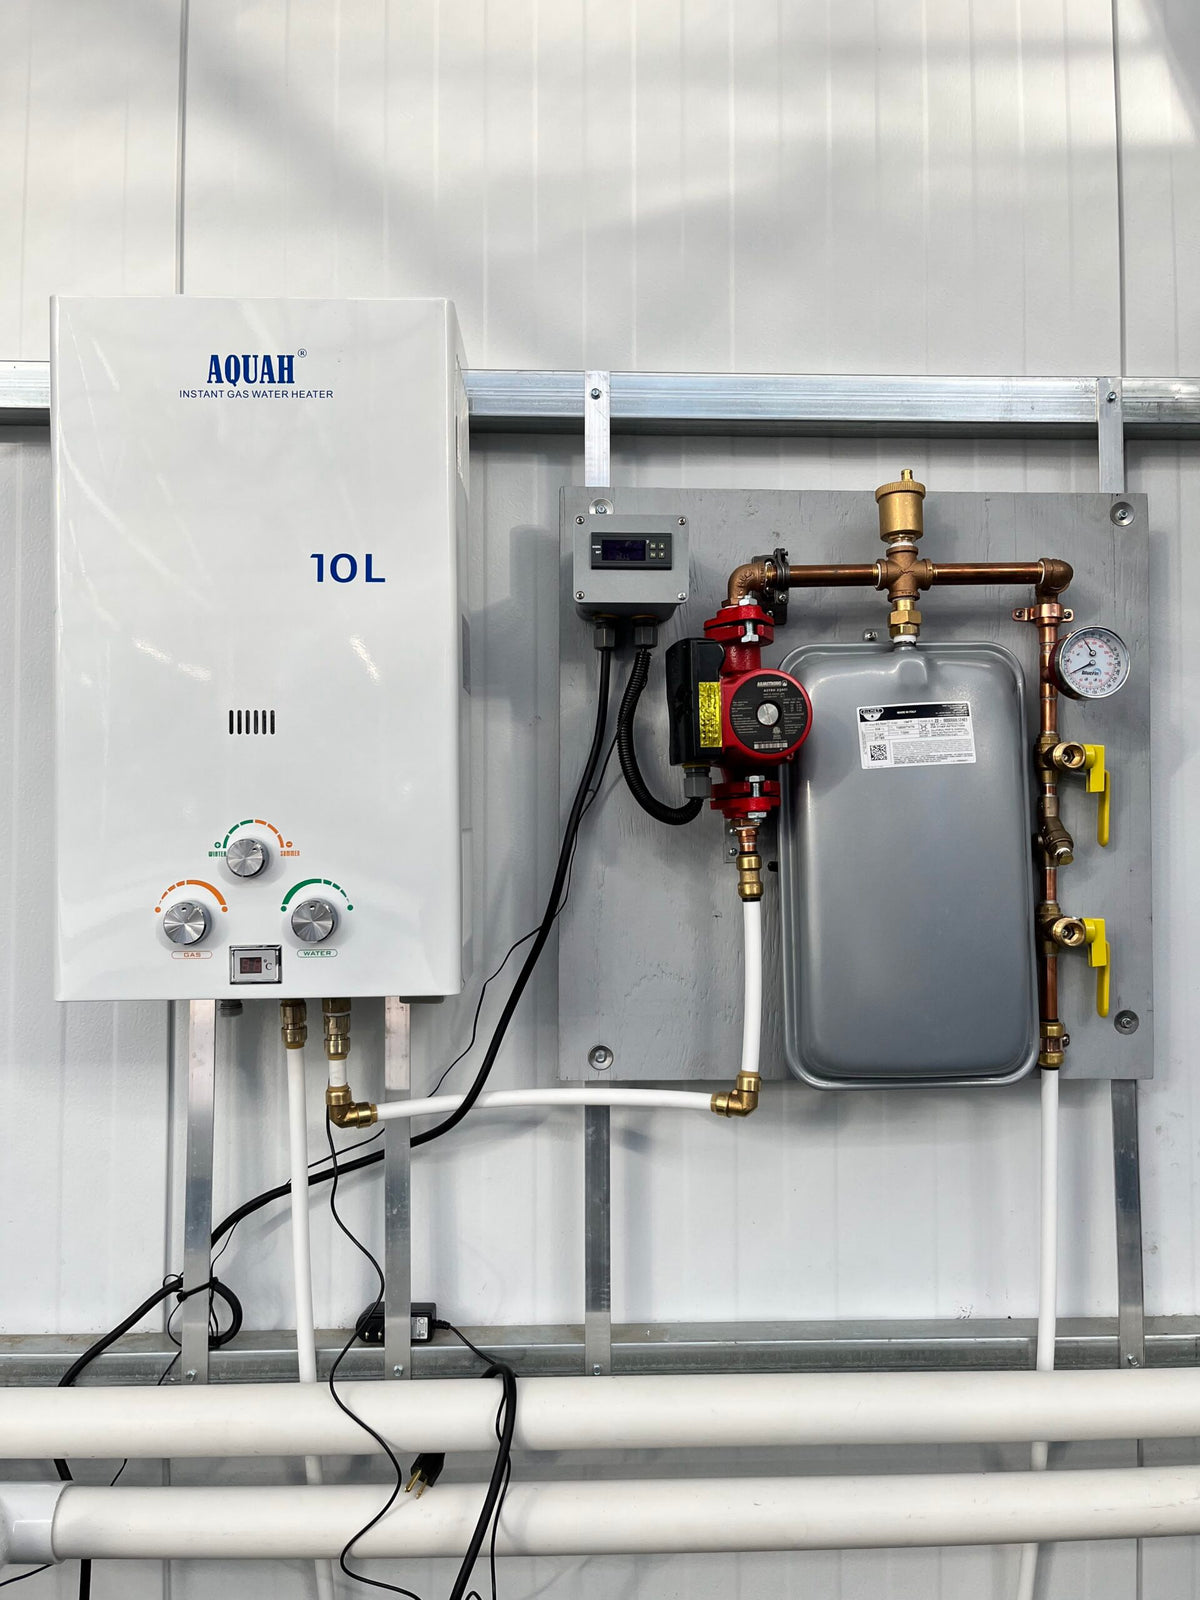 AquaHeat Propane or Natural Gas Fired Heating System, a TAS heating system, is connected to a pipe in a building.